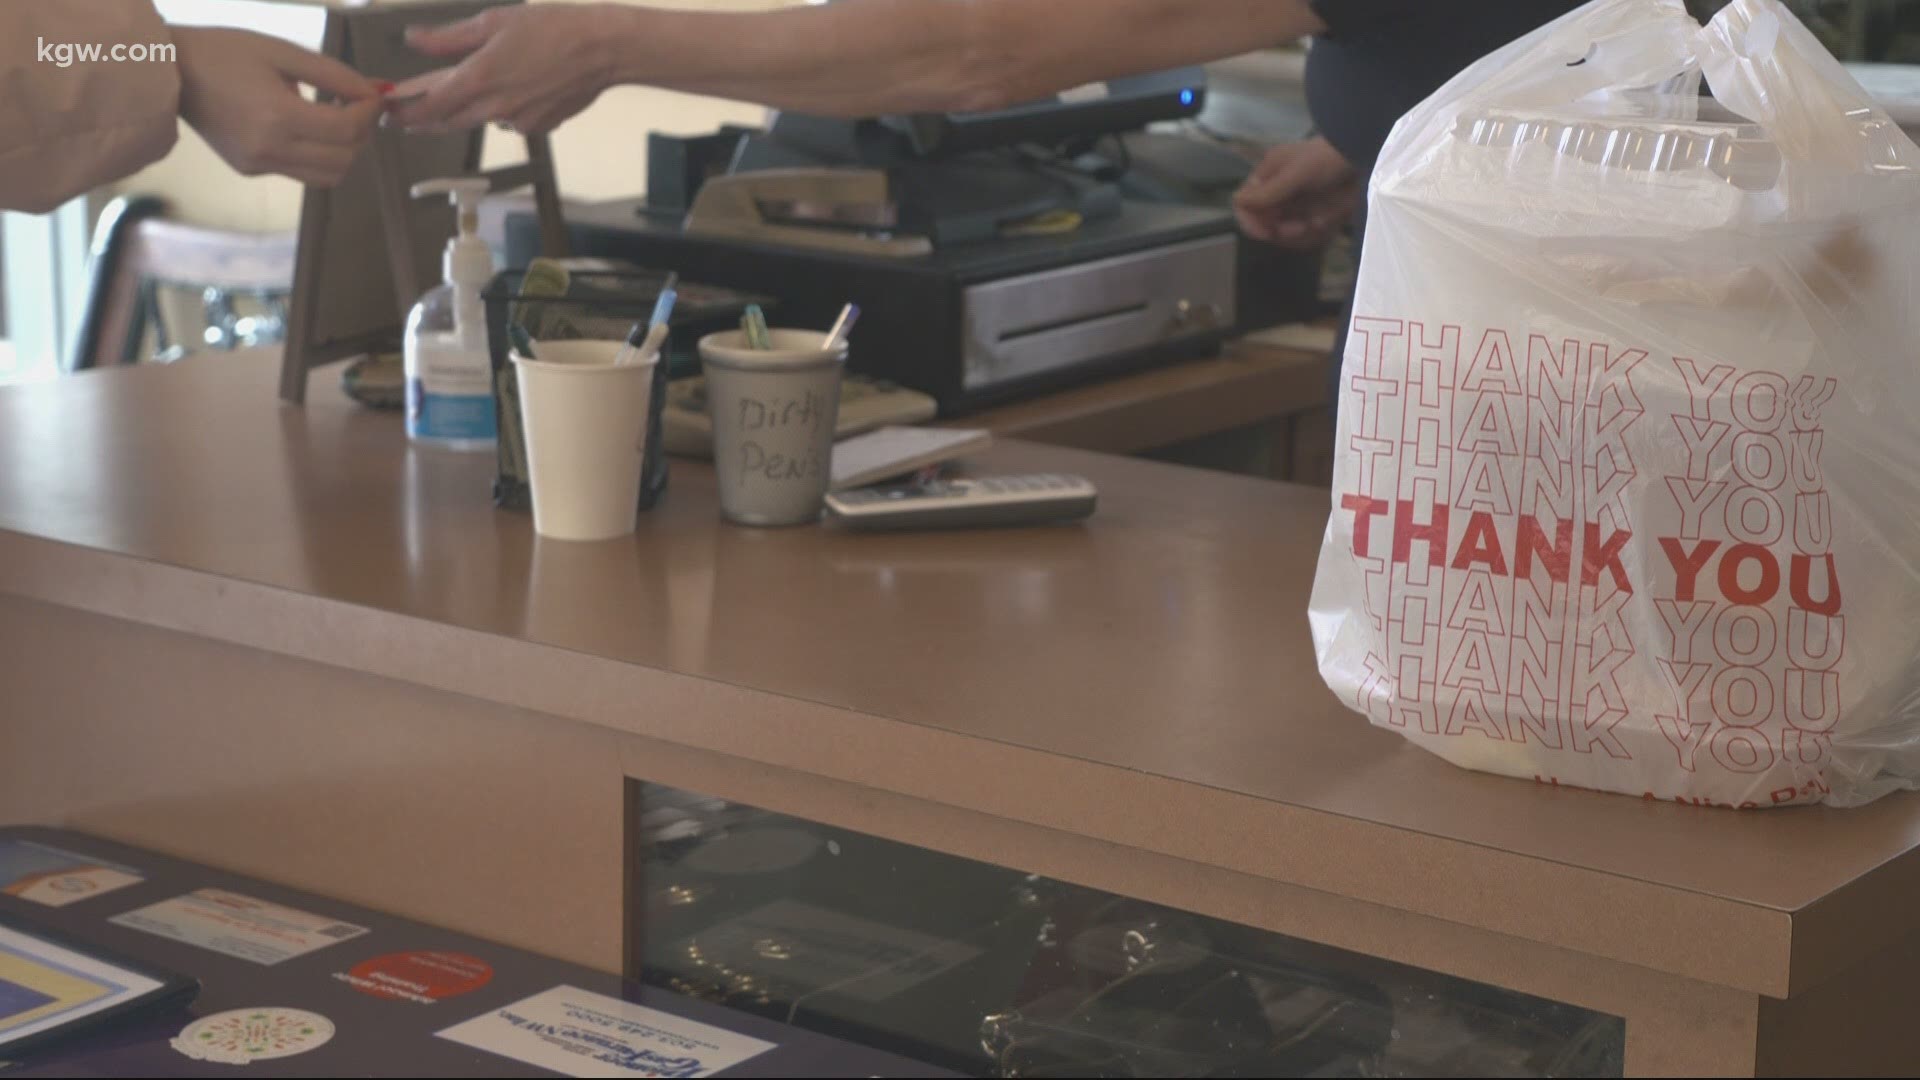 Restaurants all over the metro area struggle to stay open. KGW spoke to owners in East Portland after the news that businesses will be allowed to reopen Feb. 12.